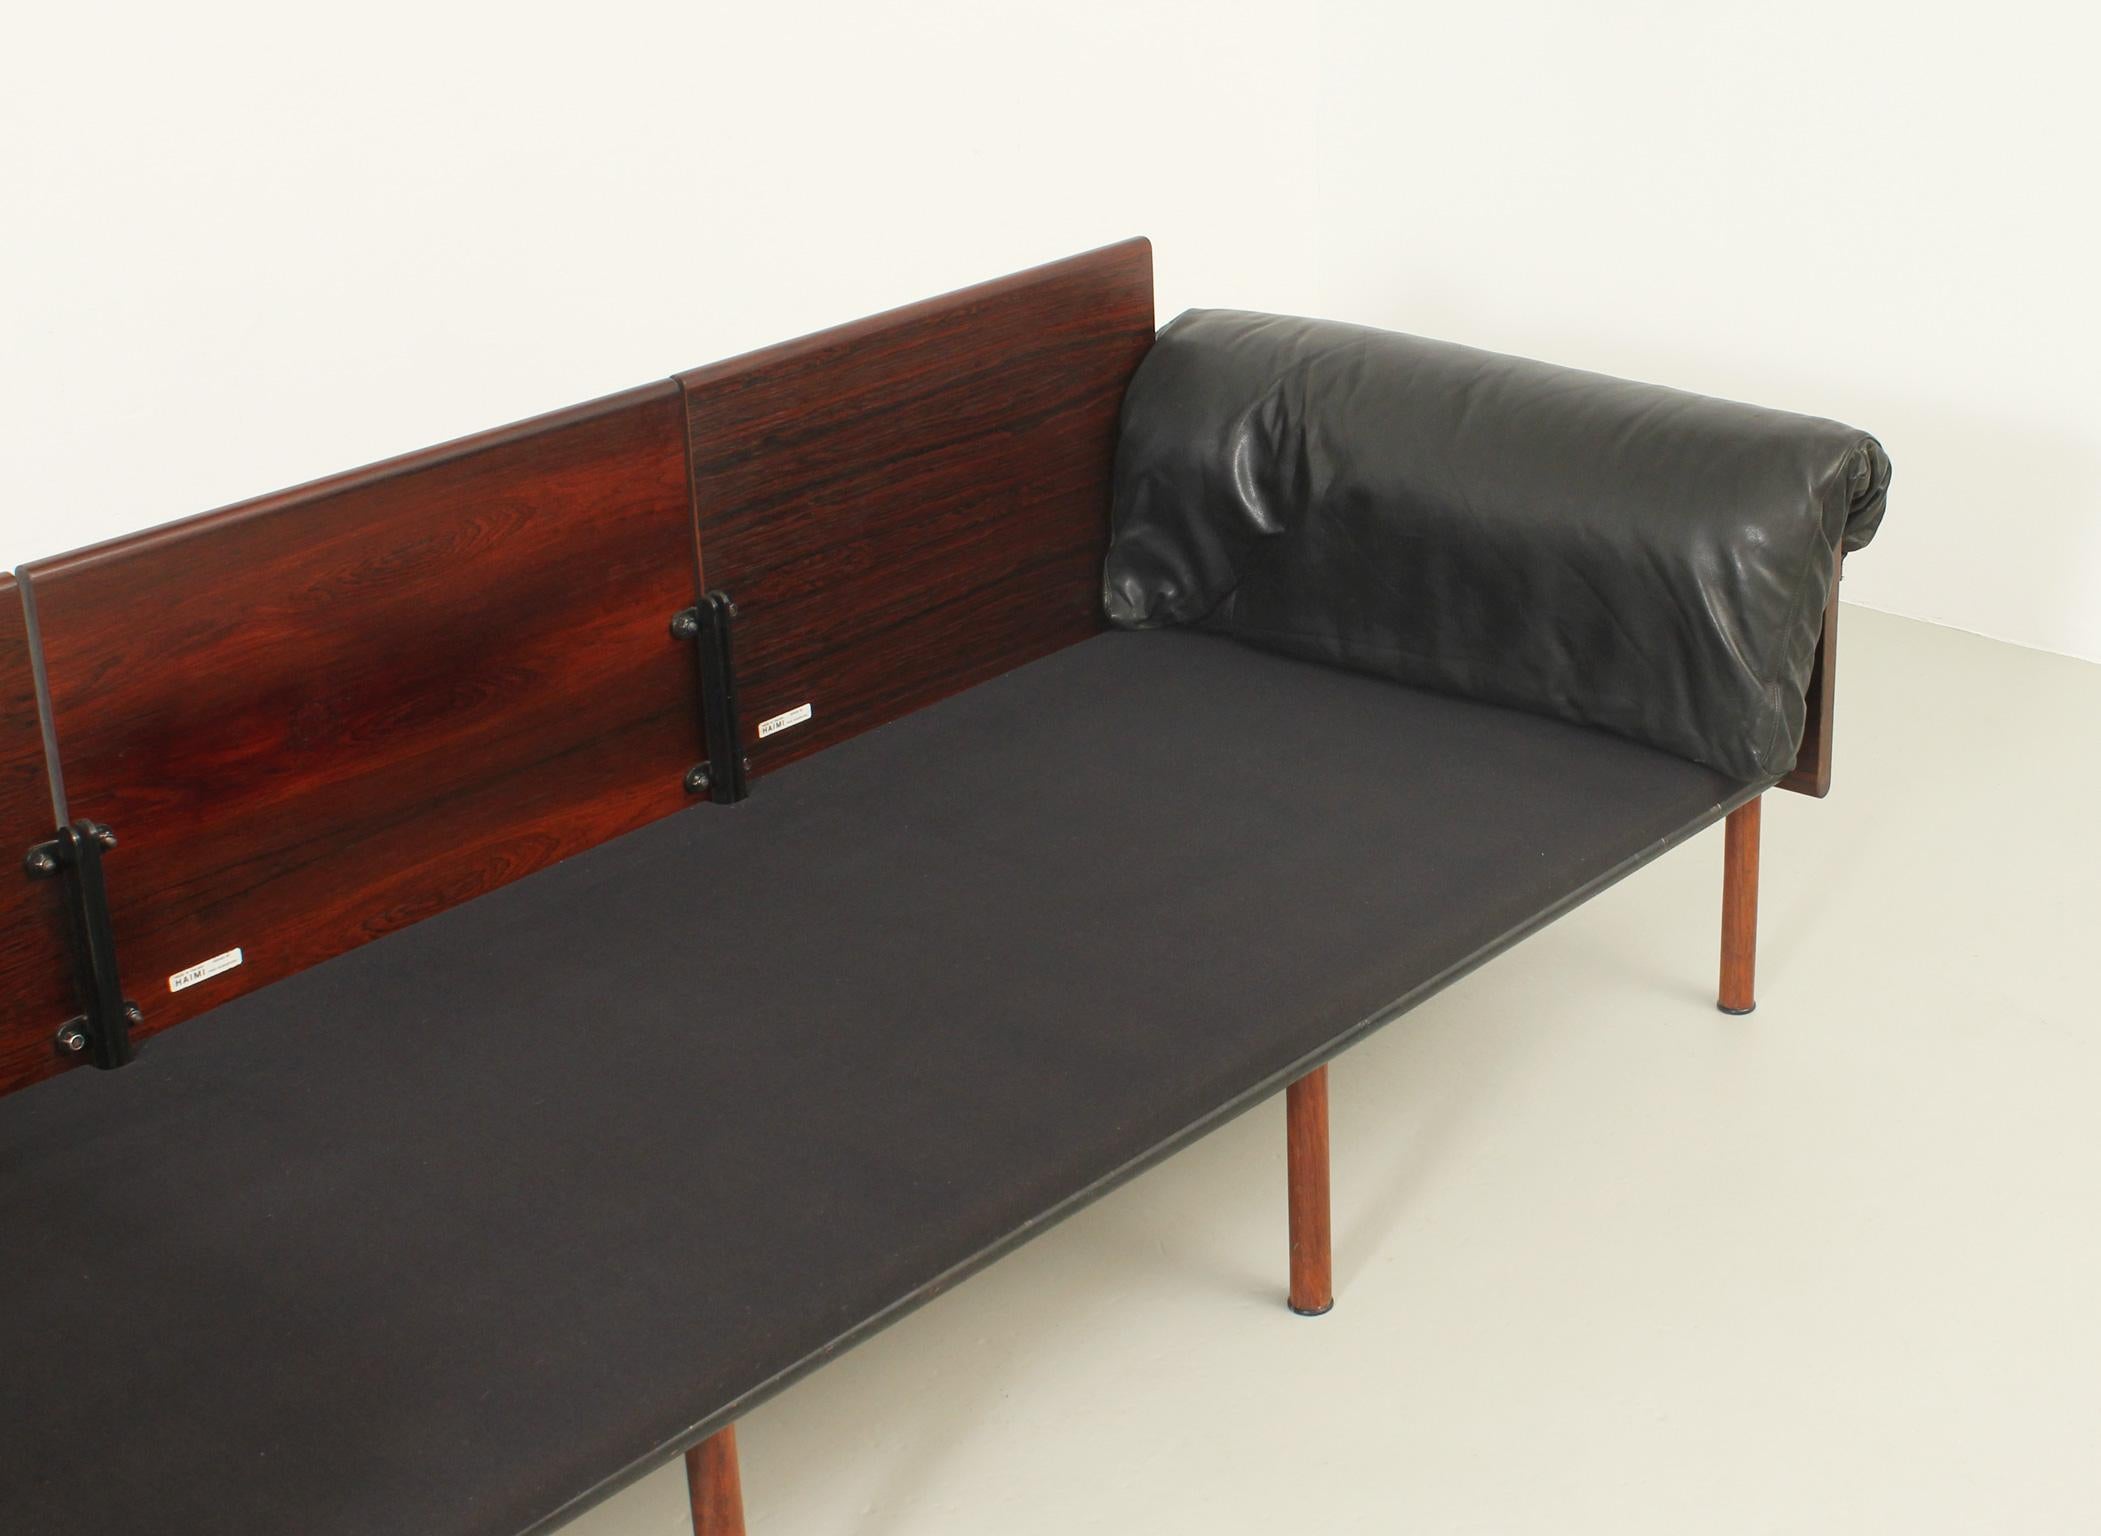 Ateljee Sofa by Yrjö Kukkapuro for Haimi, Finland In Good Condition For Sale In Barcelona, ES